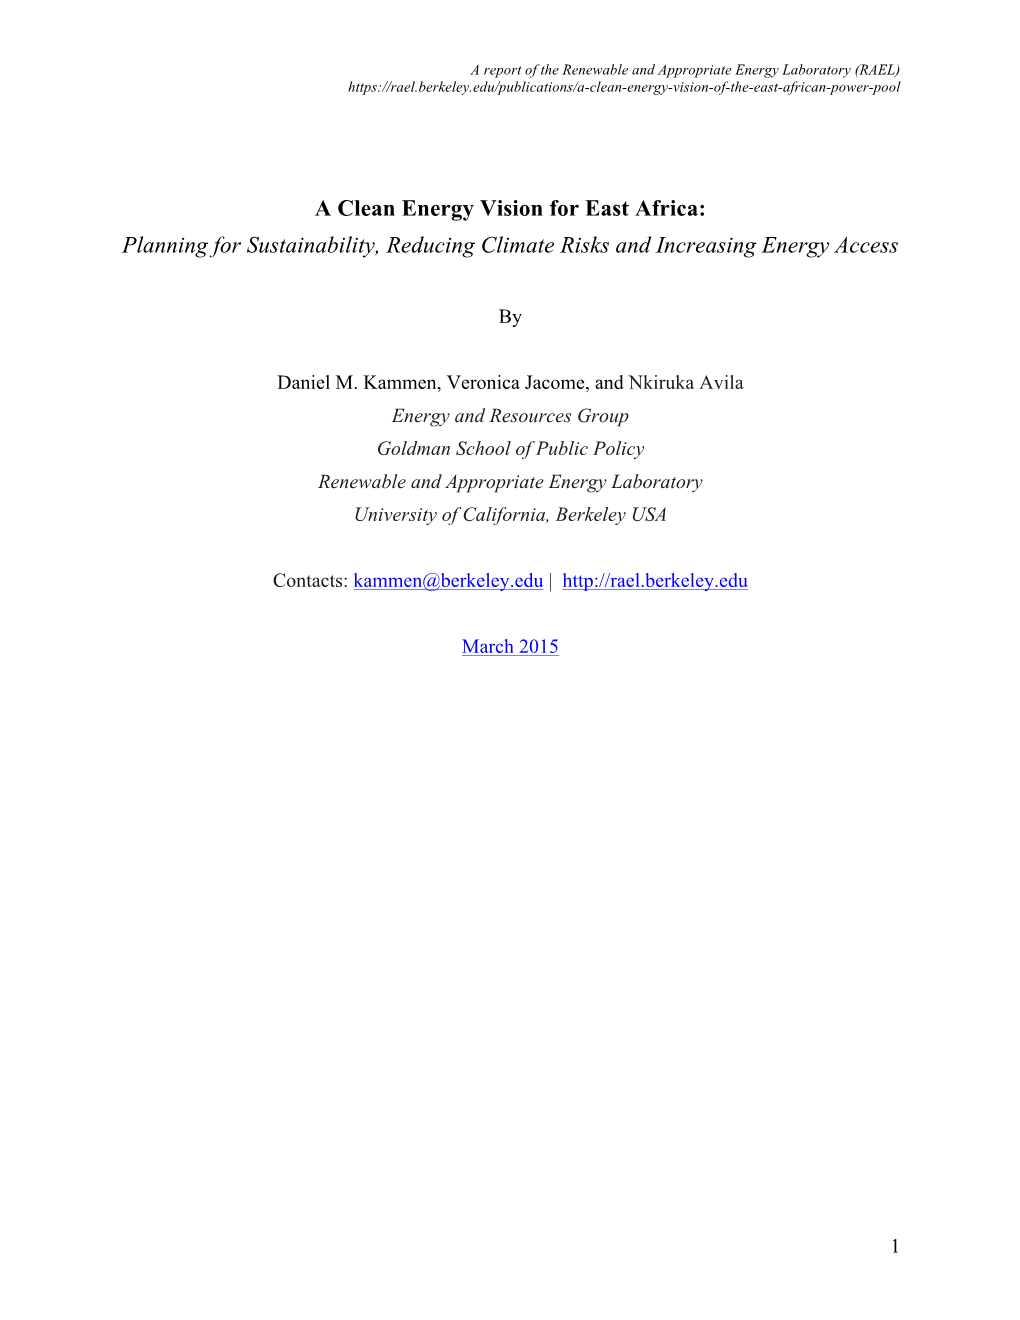 A Clean Energy Vision for East Africa: Planning for Sustainability, Reducing Climate Risks and Increasing Energy Access